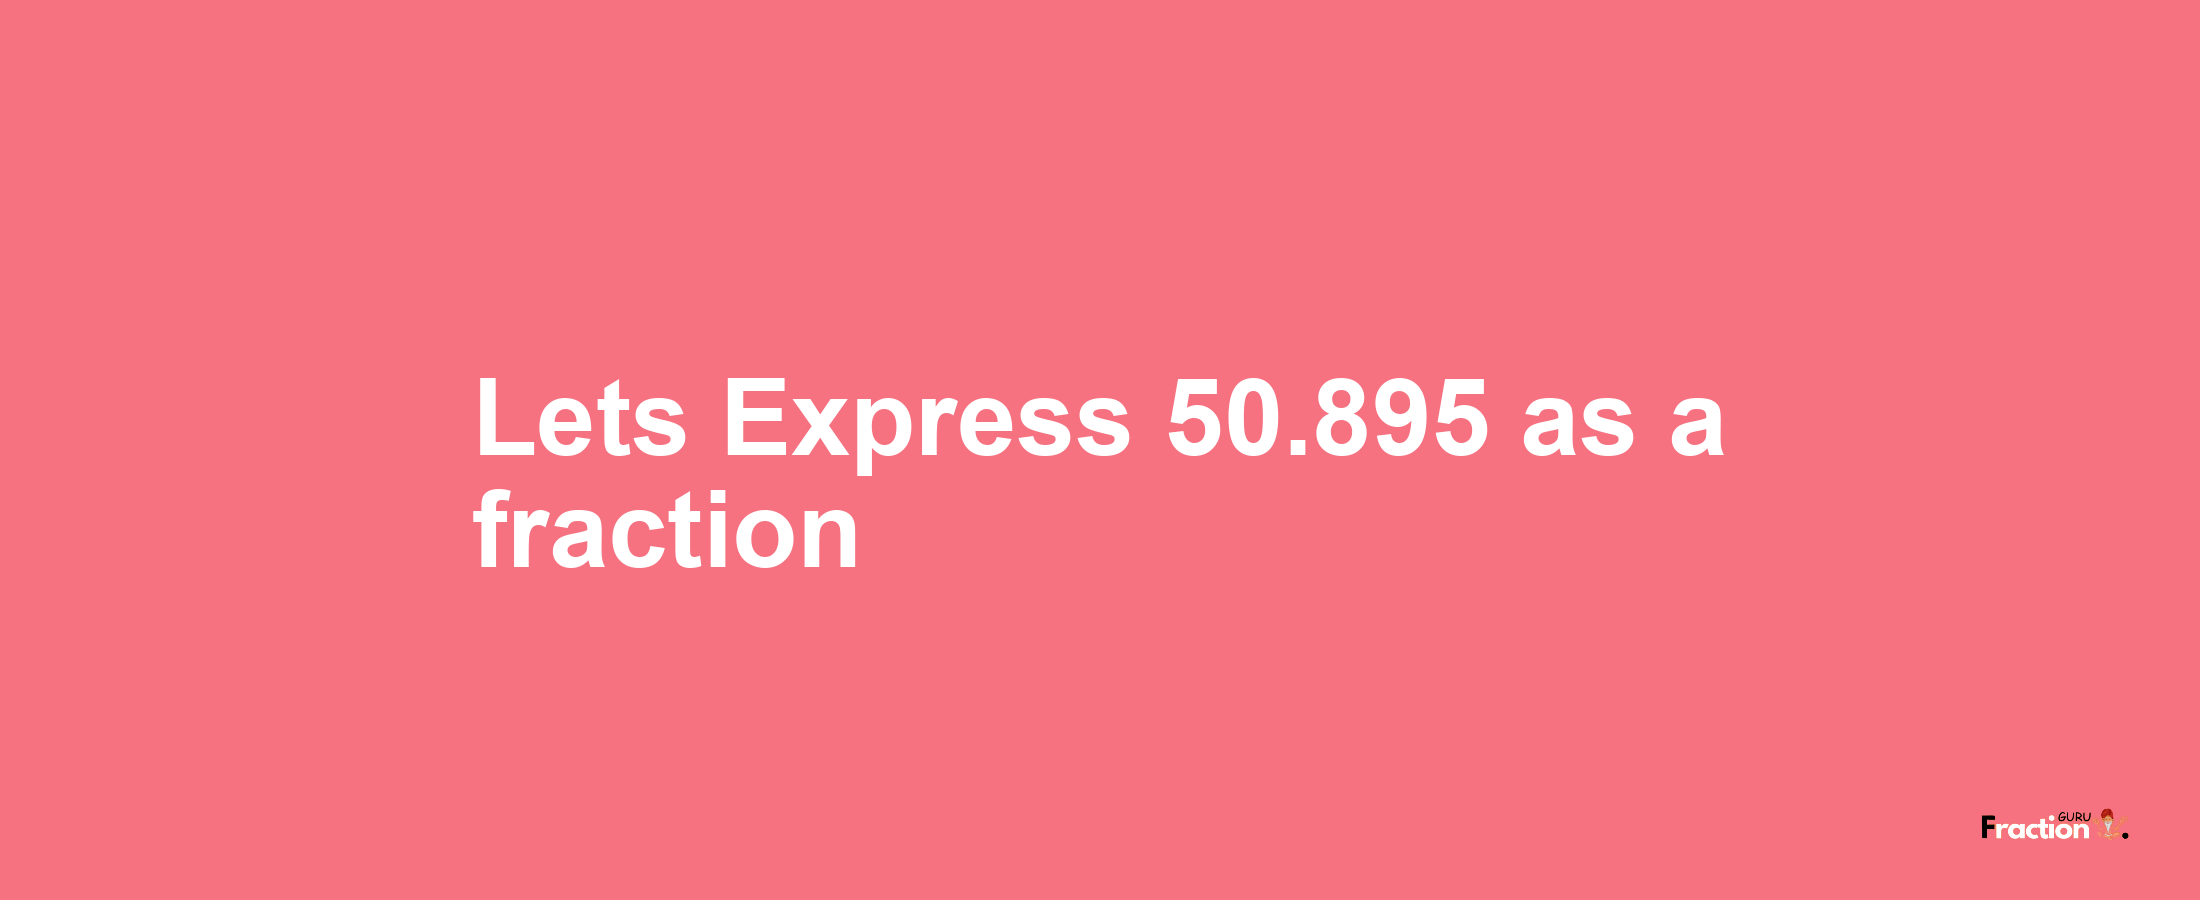 Lets Express 50.895 as afraction